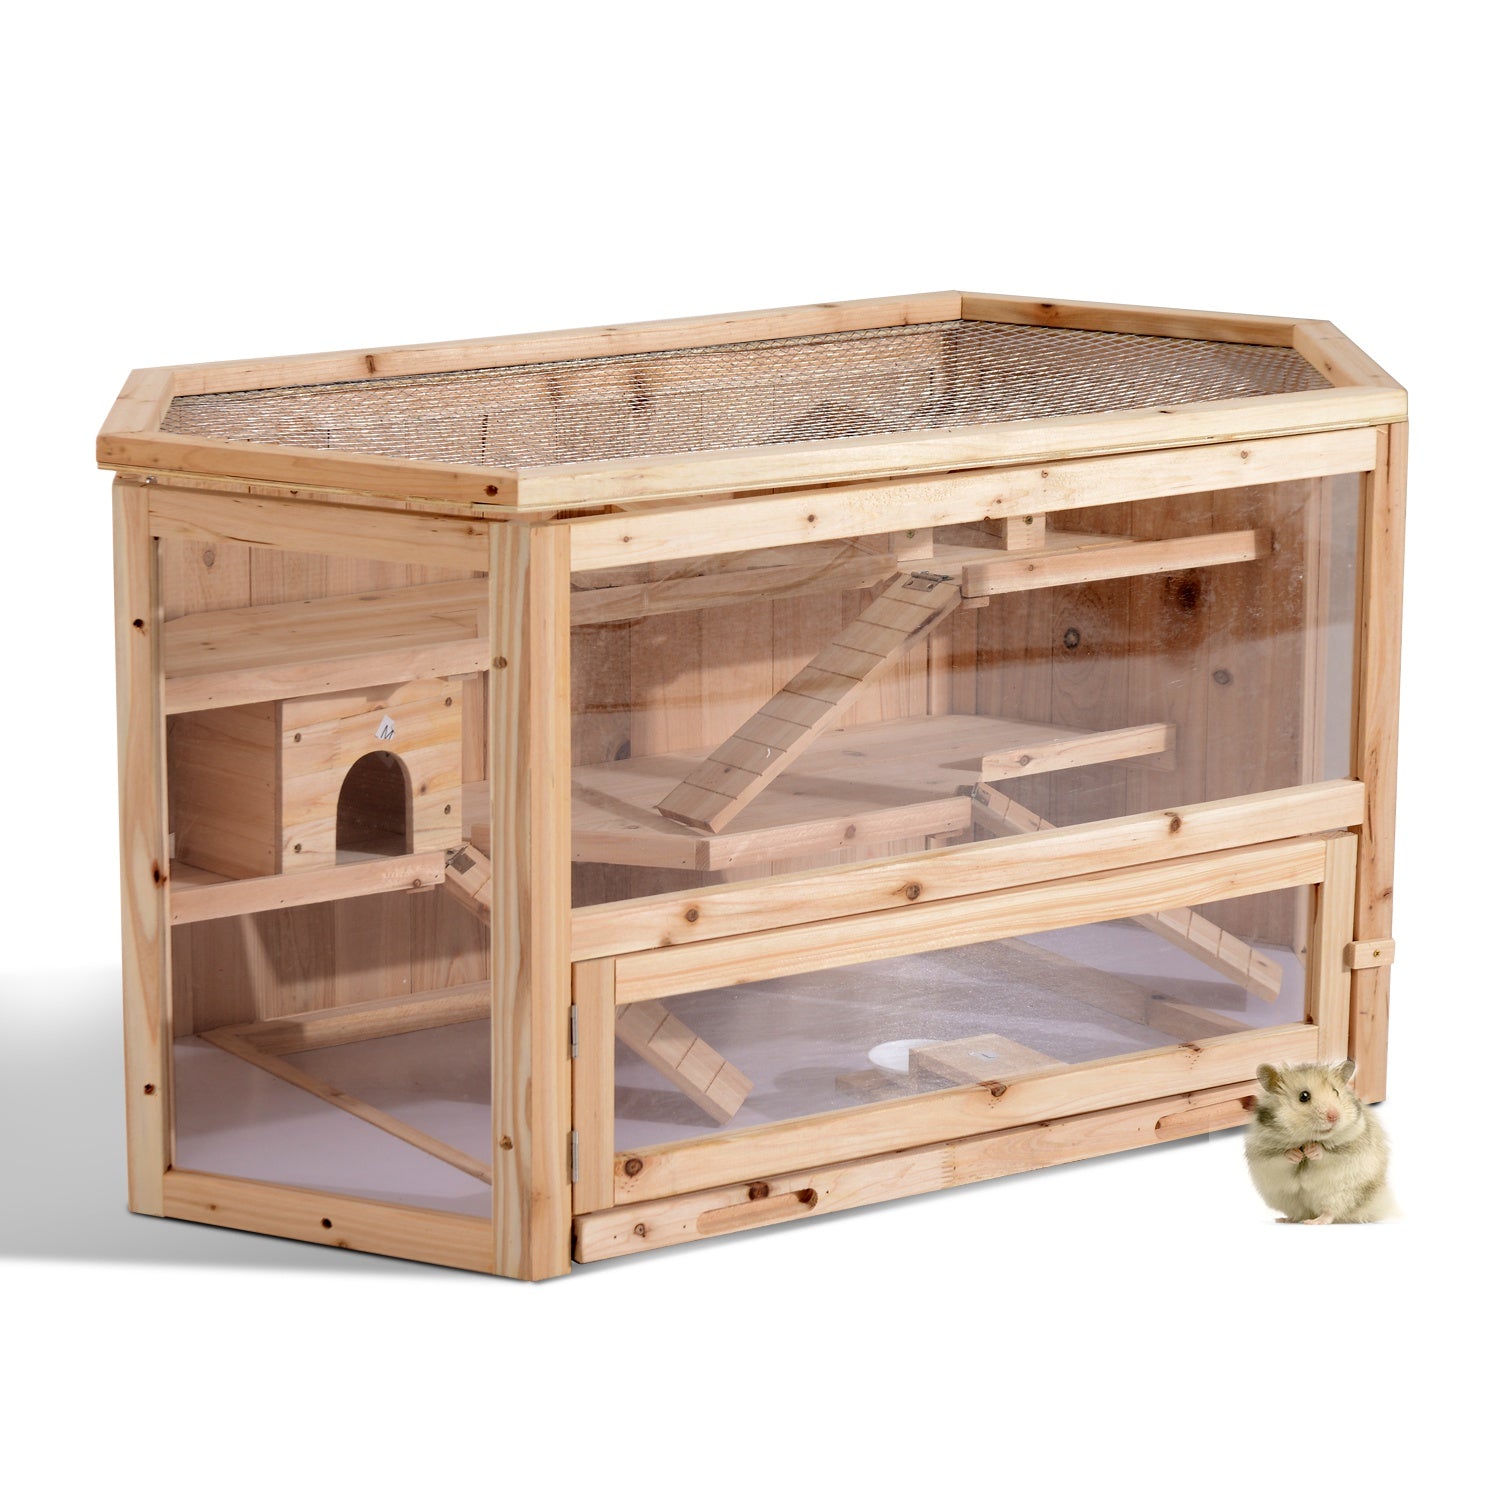 Wooden Hamster Cage Rodent Mouse Pet Small Animal hut Box, 115Lx60Wx58H cm 